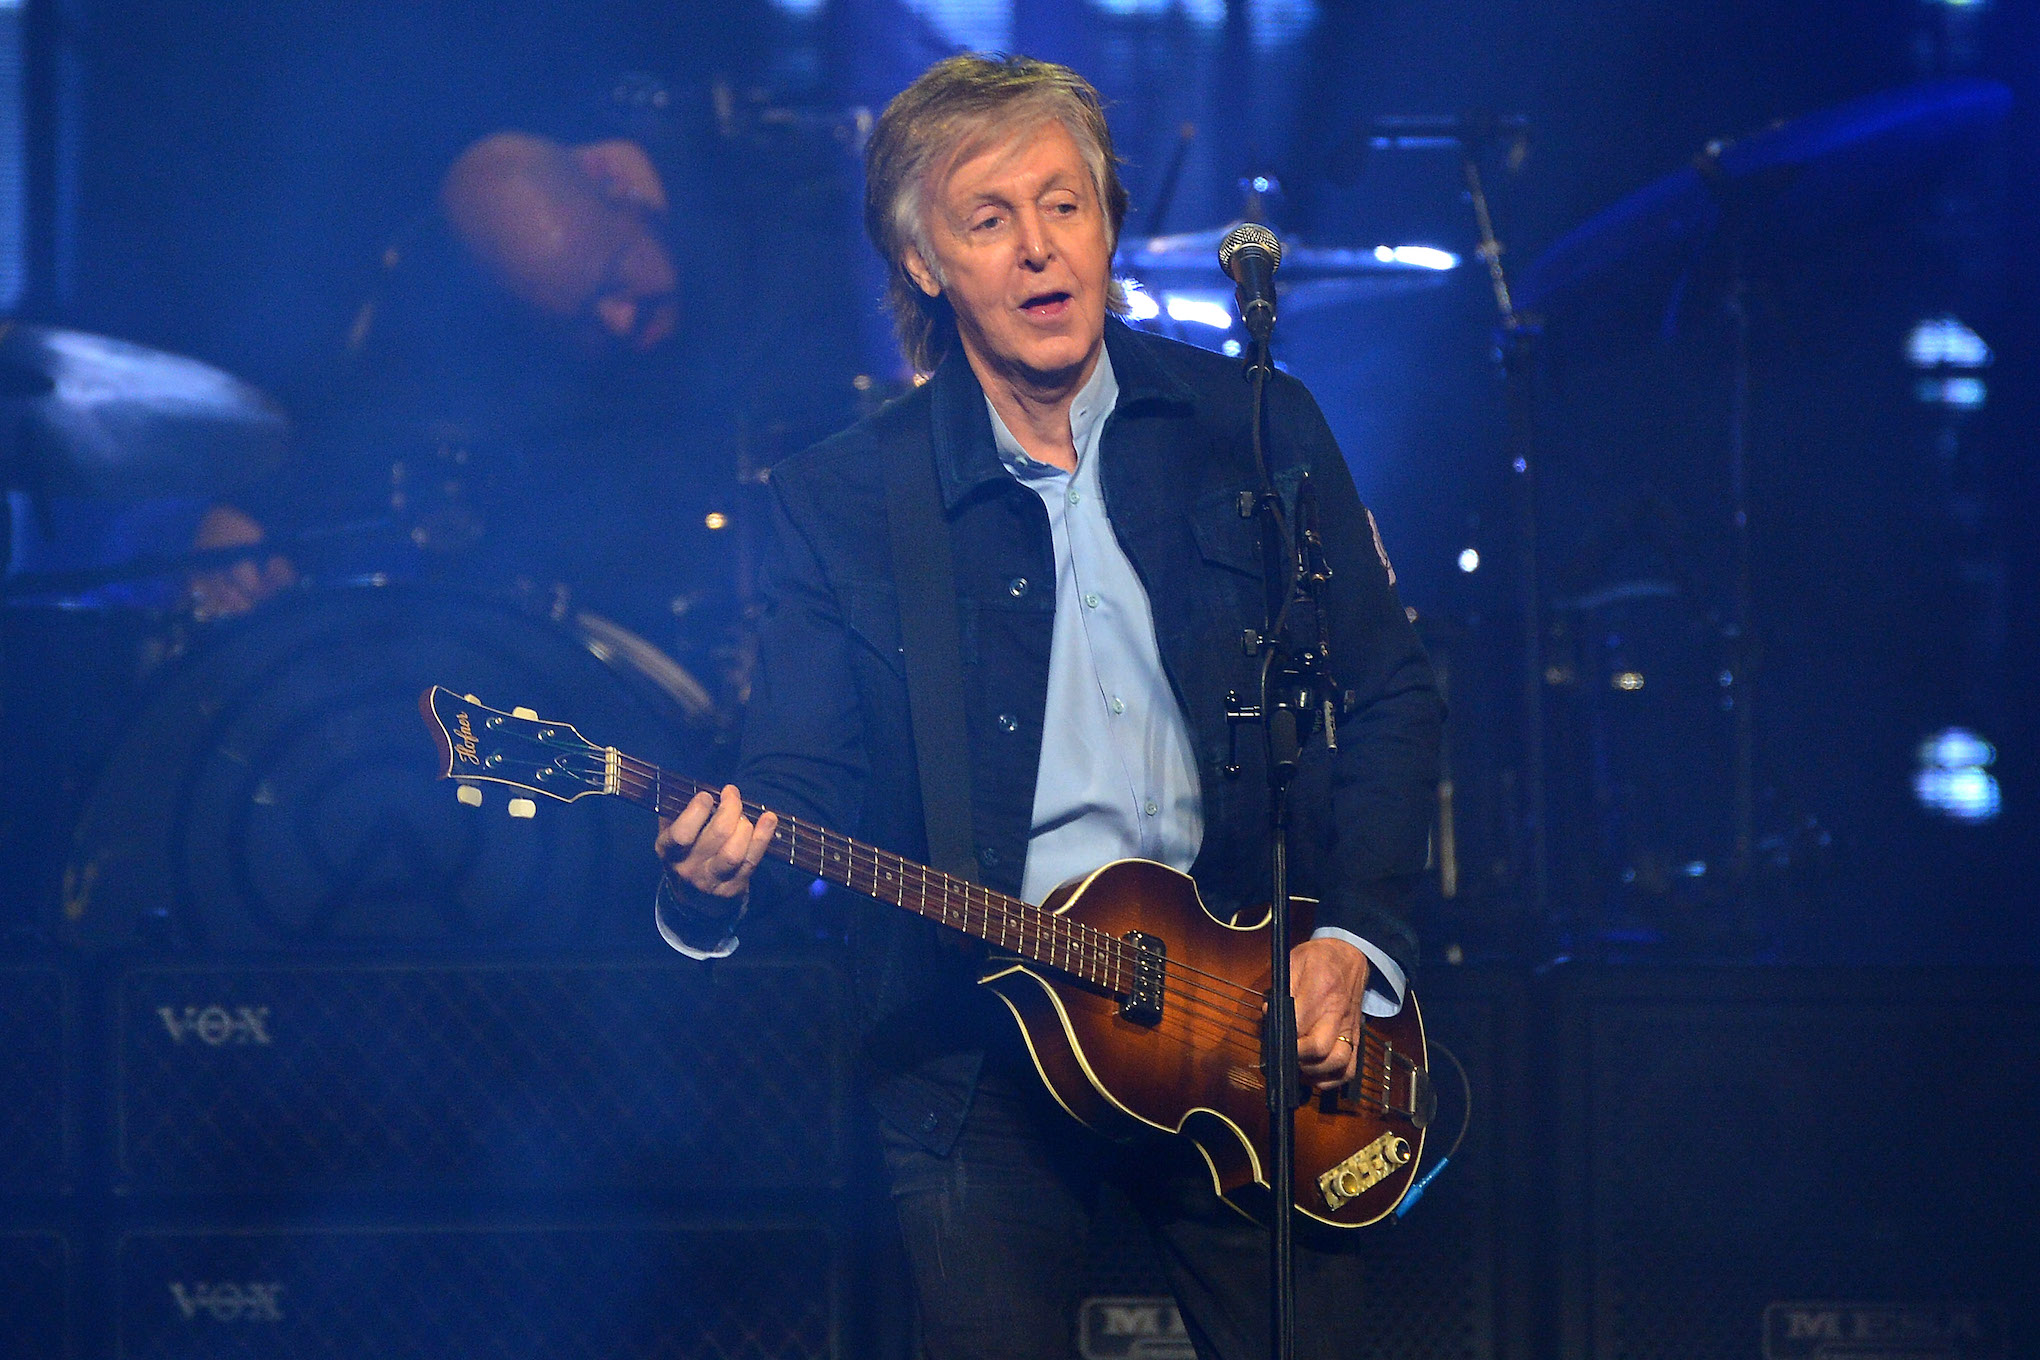 Paul McCartney performs at the O2 Arena during his 'Freshen Up' tour in London, England